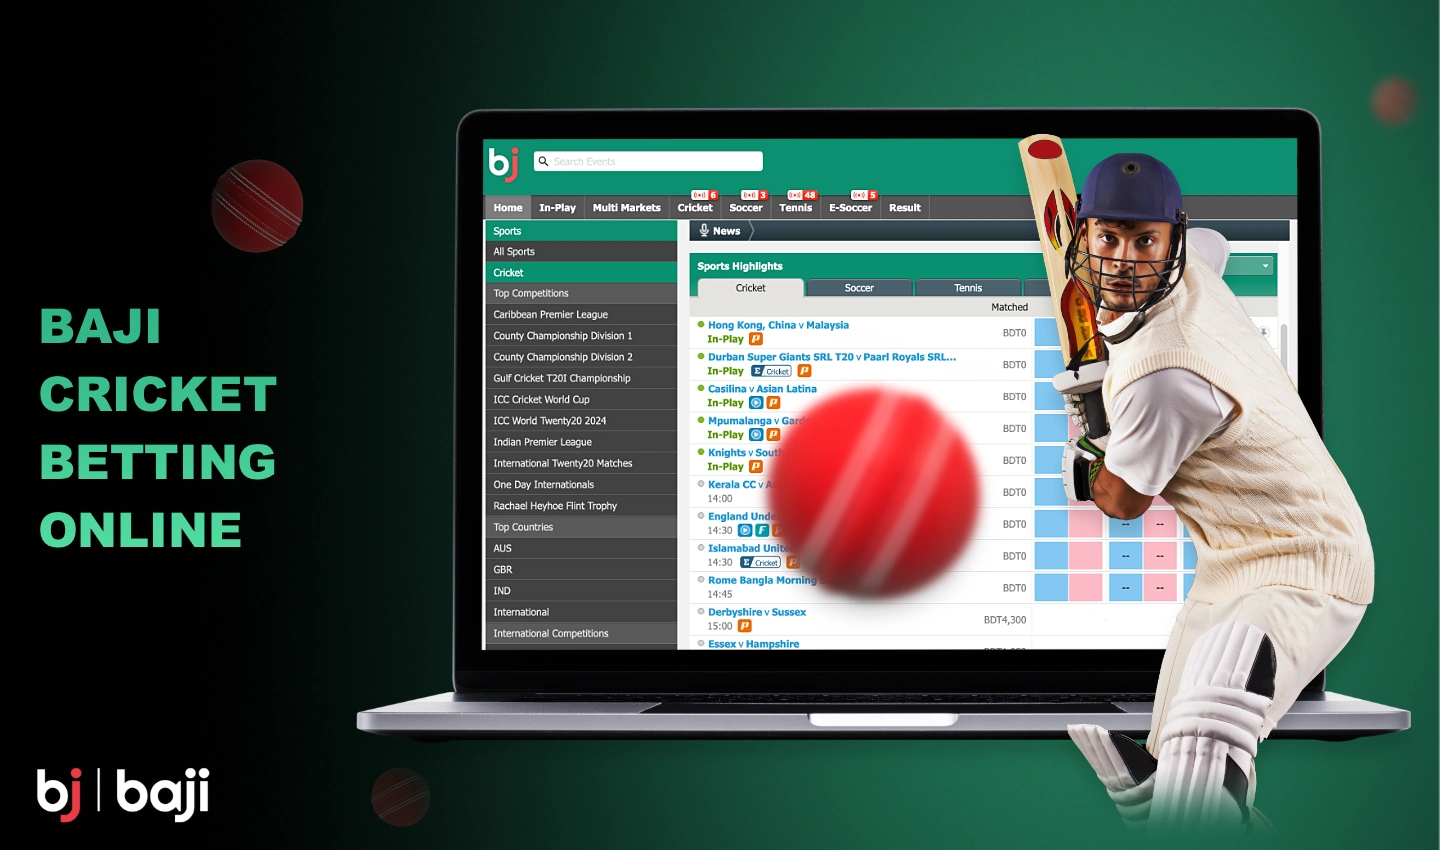 Baji will delight users with a wide cricket betting market, including betting on popular tournaments